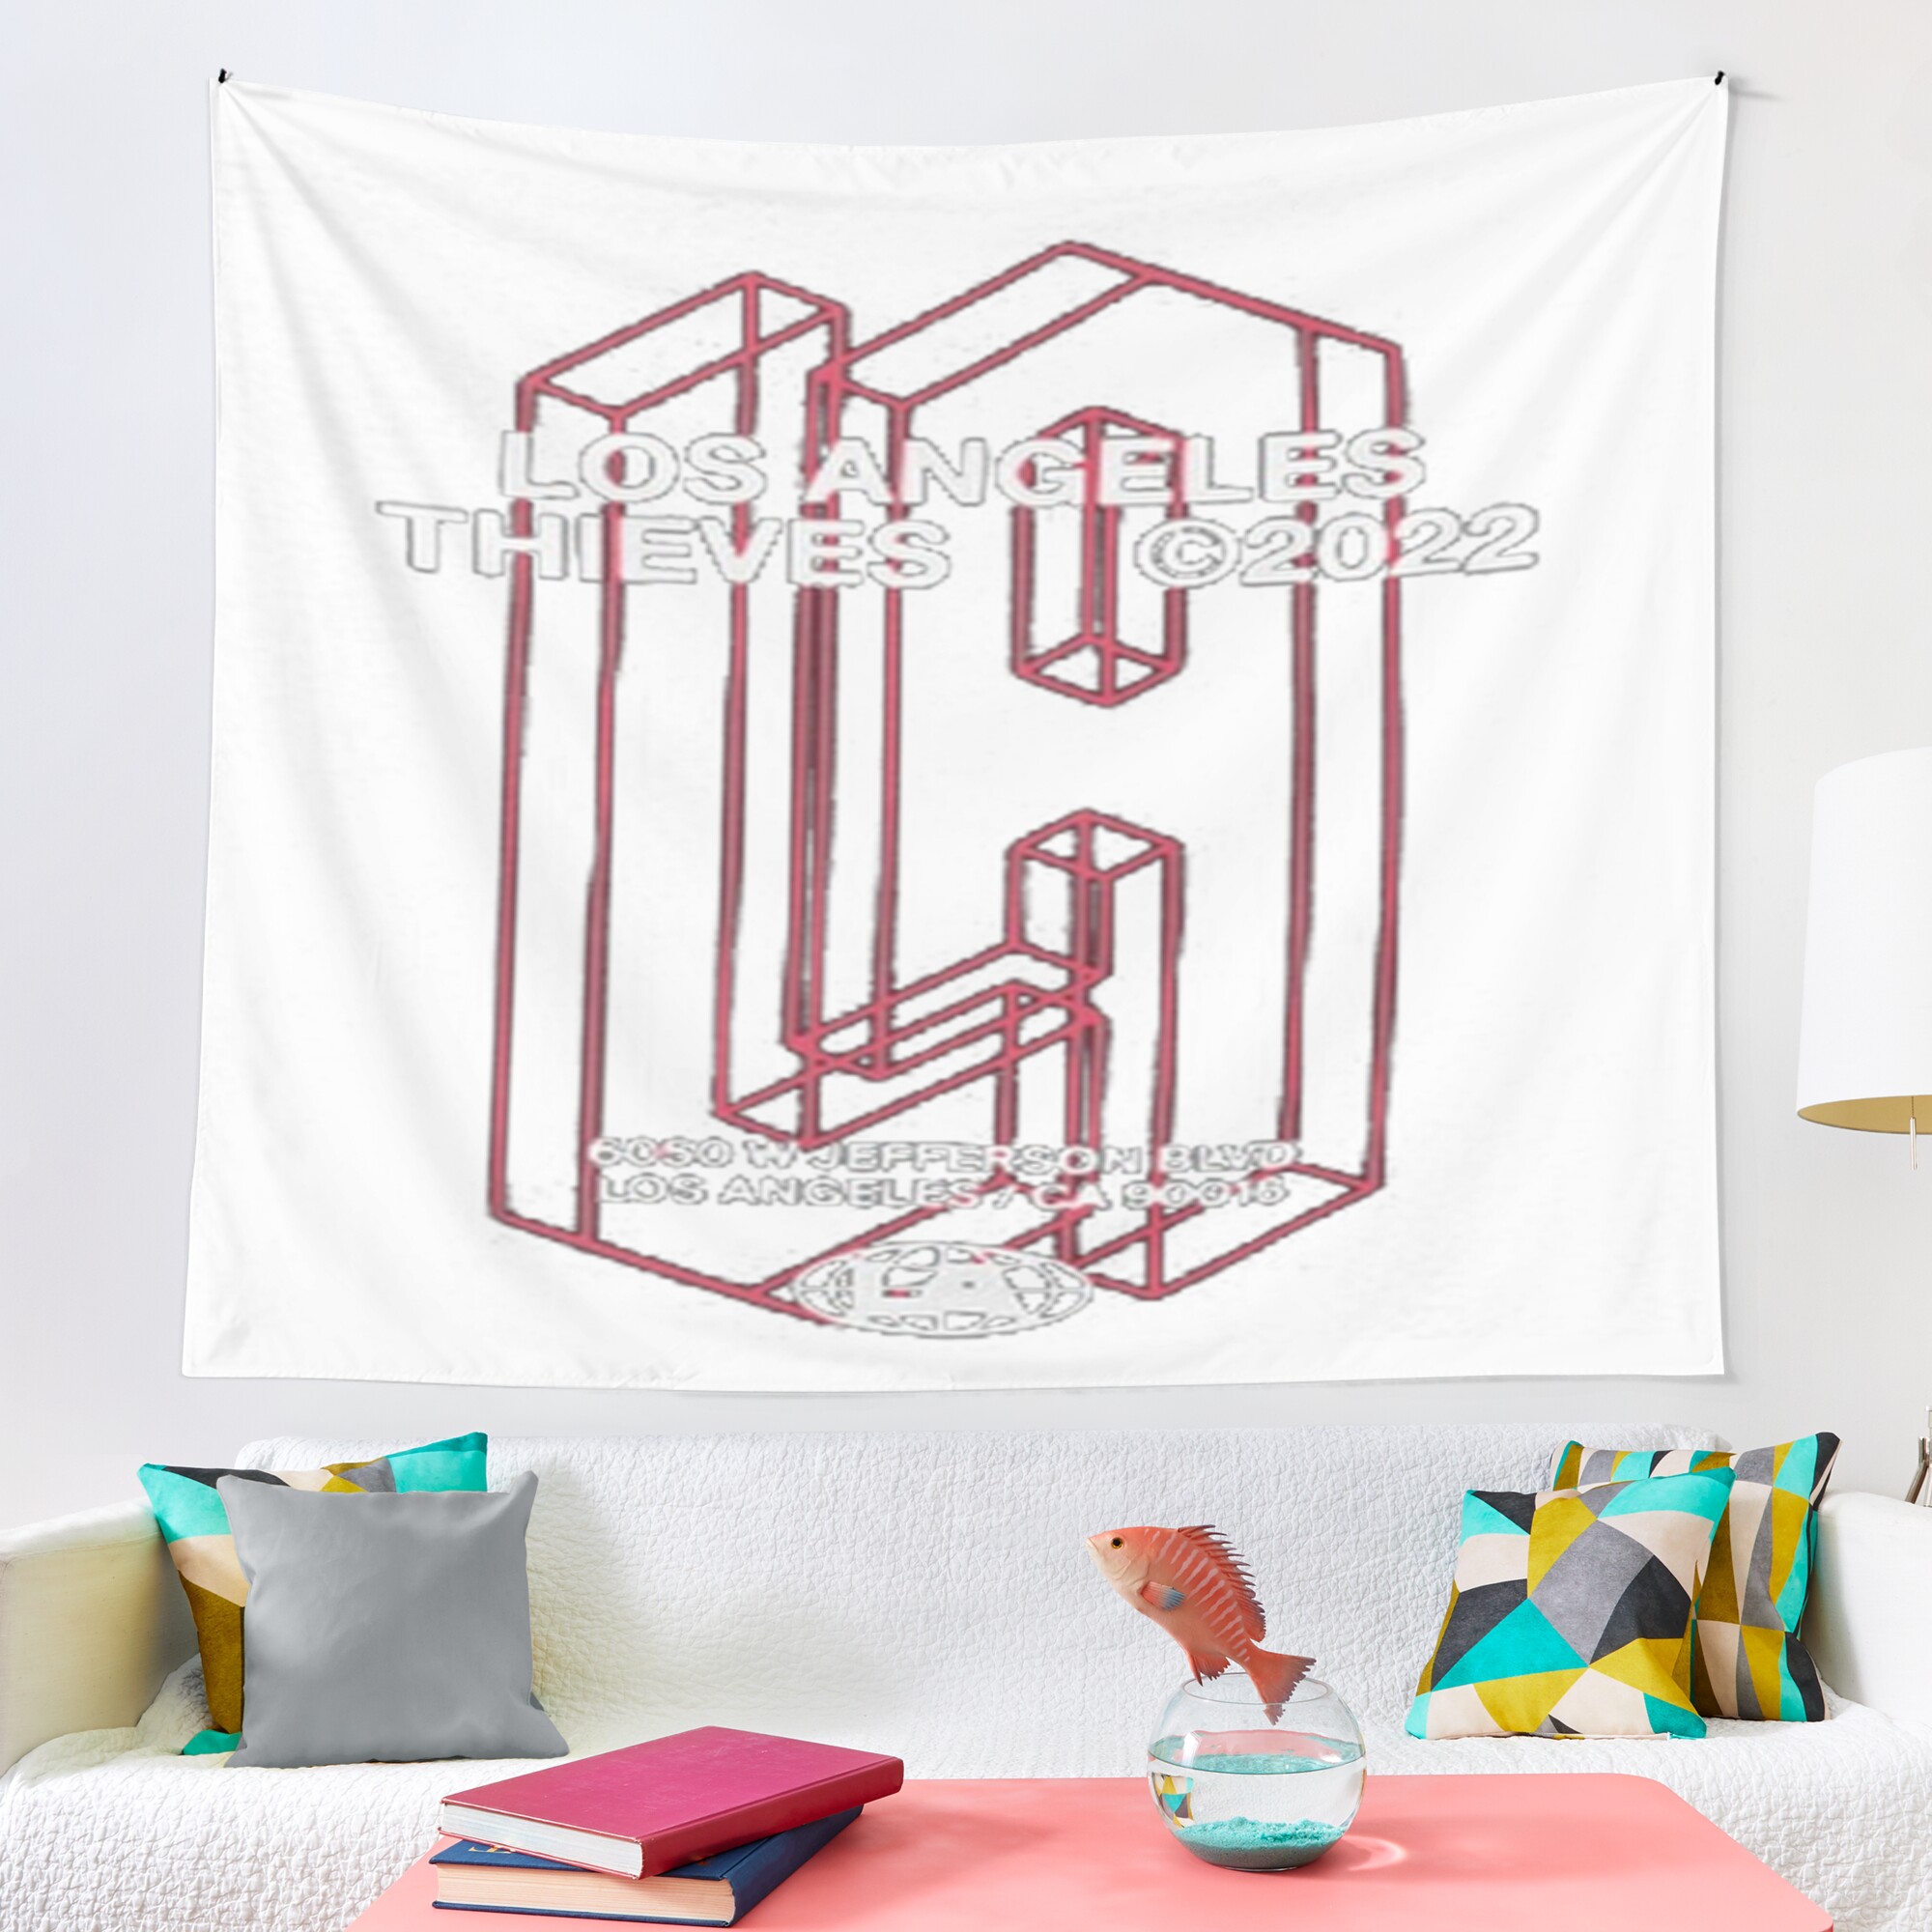 urtapestry lifestyle largesquare2000x2000 7 - 100 Thieves Shop